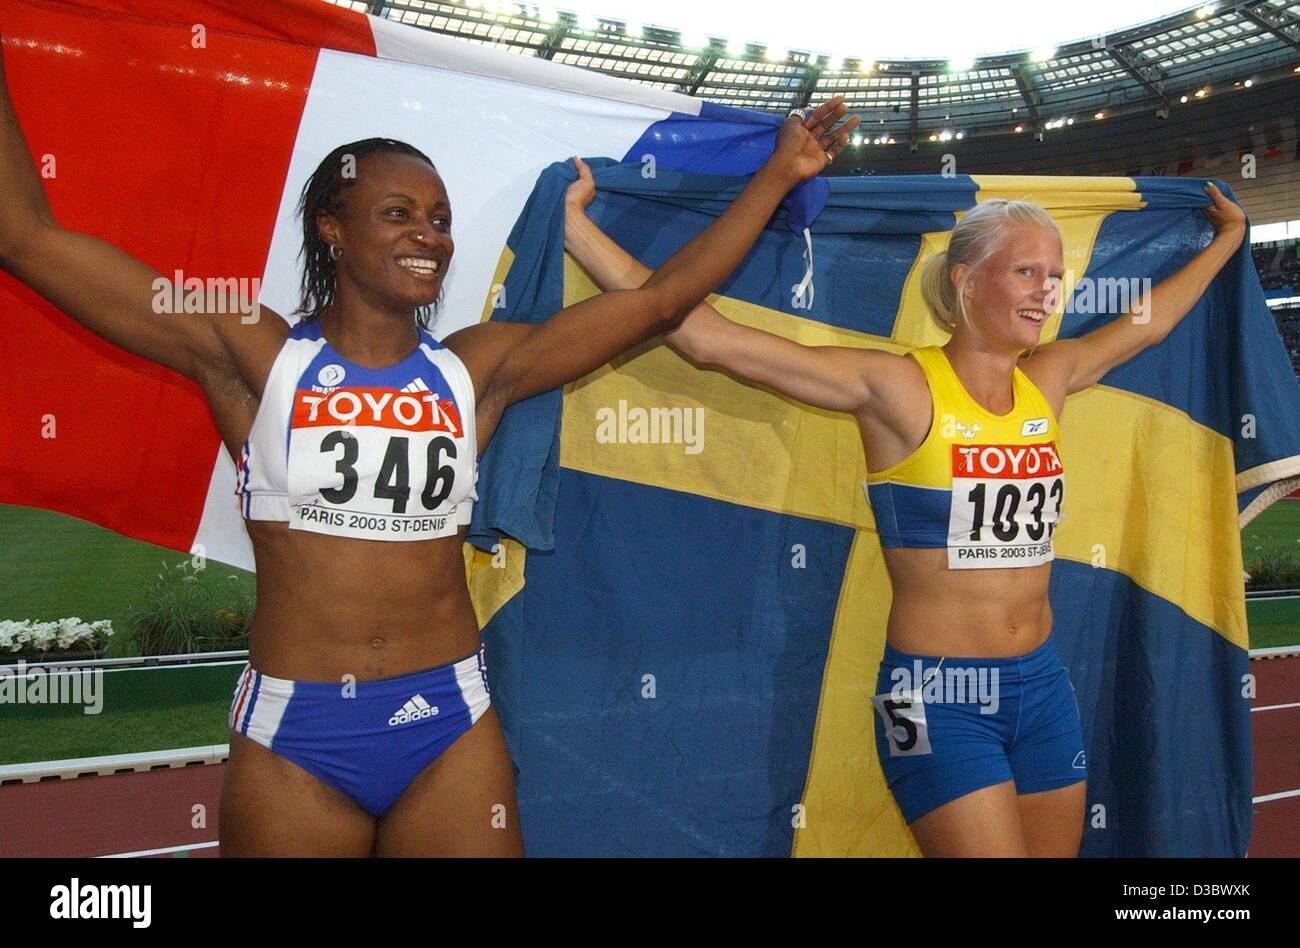 (dpa) - The two best-placed athletes of the heptathlon event wave their country's flags: Carolina Klueft from Sweden (R) wins the event with 7001 points and Eunice Barber from France wins second place with 6755 points in the women's heptathlon at the 9th IAAF Athletic World Championships at the Stad Stock Photo